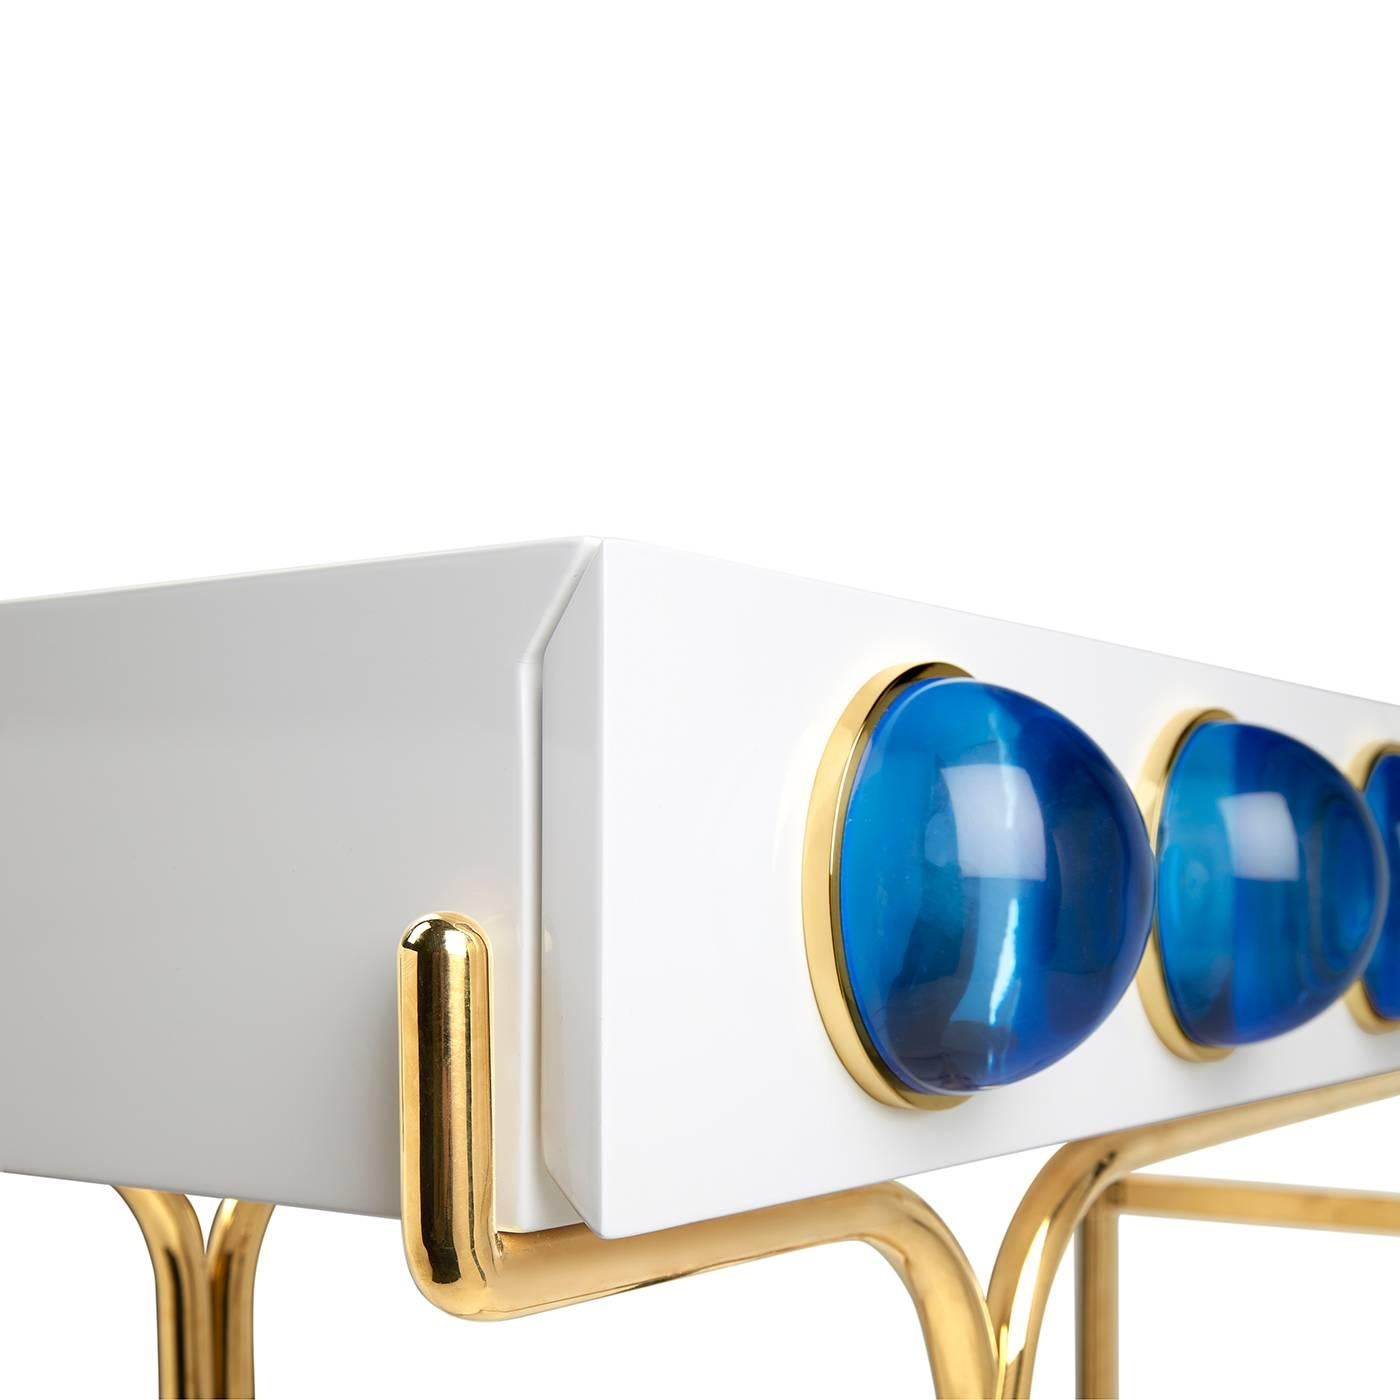 Futuristic elegance. A glossy, white lacquer cabinet cradled by a sinuous brass framework and capped with blue solid acrylic cabochons. Small footprint but big impact, our Globo console is guaranteed to deliver mega glamour.

Specs:
White,